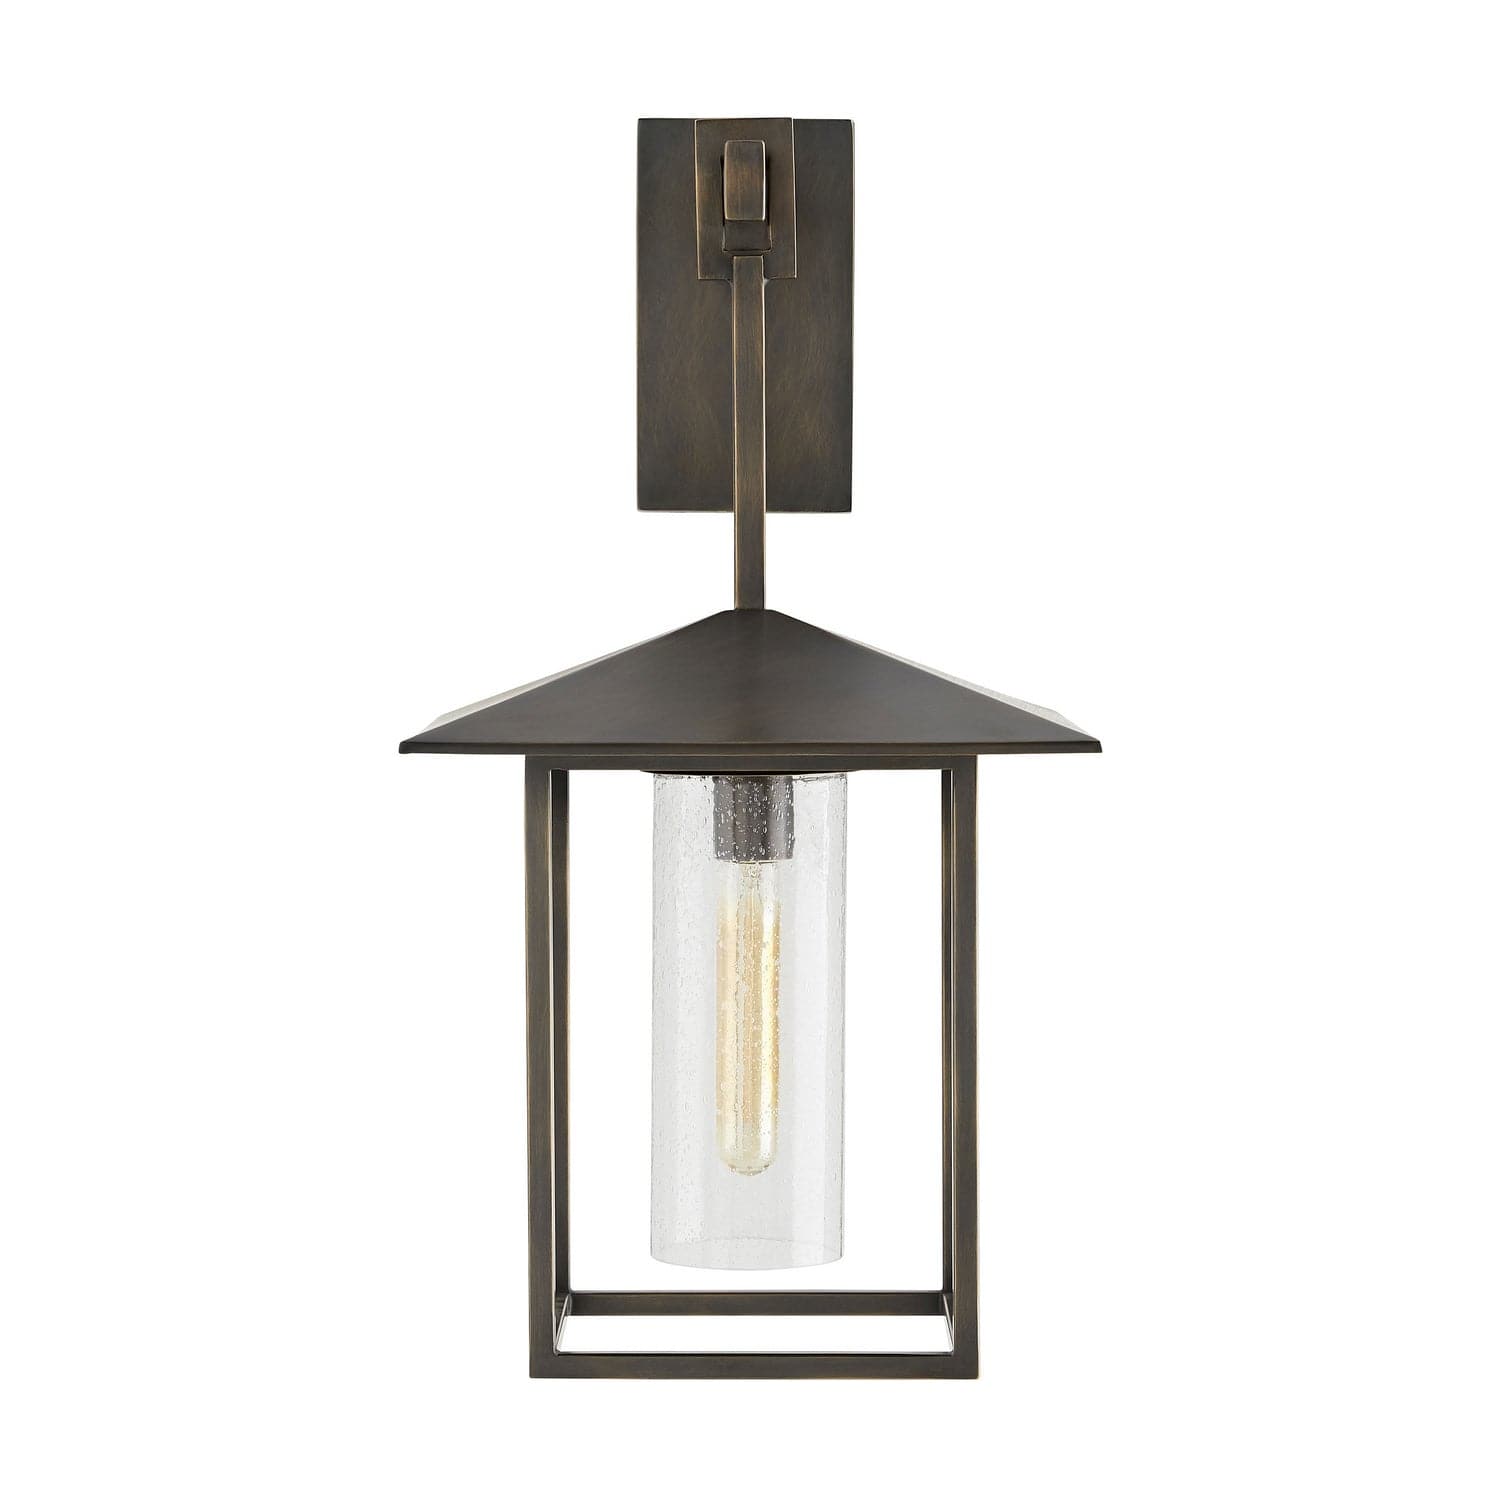 Arteriors - DB49010 - One Light Wall Sconce - Ray Booth for Arteriors - Aged Bronze